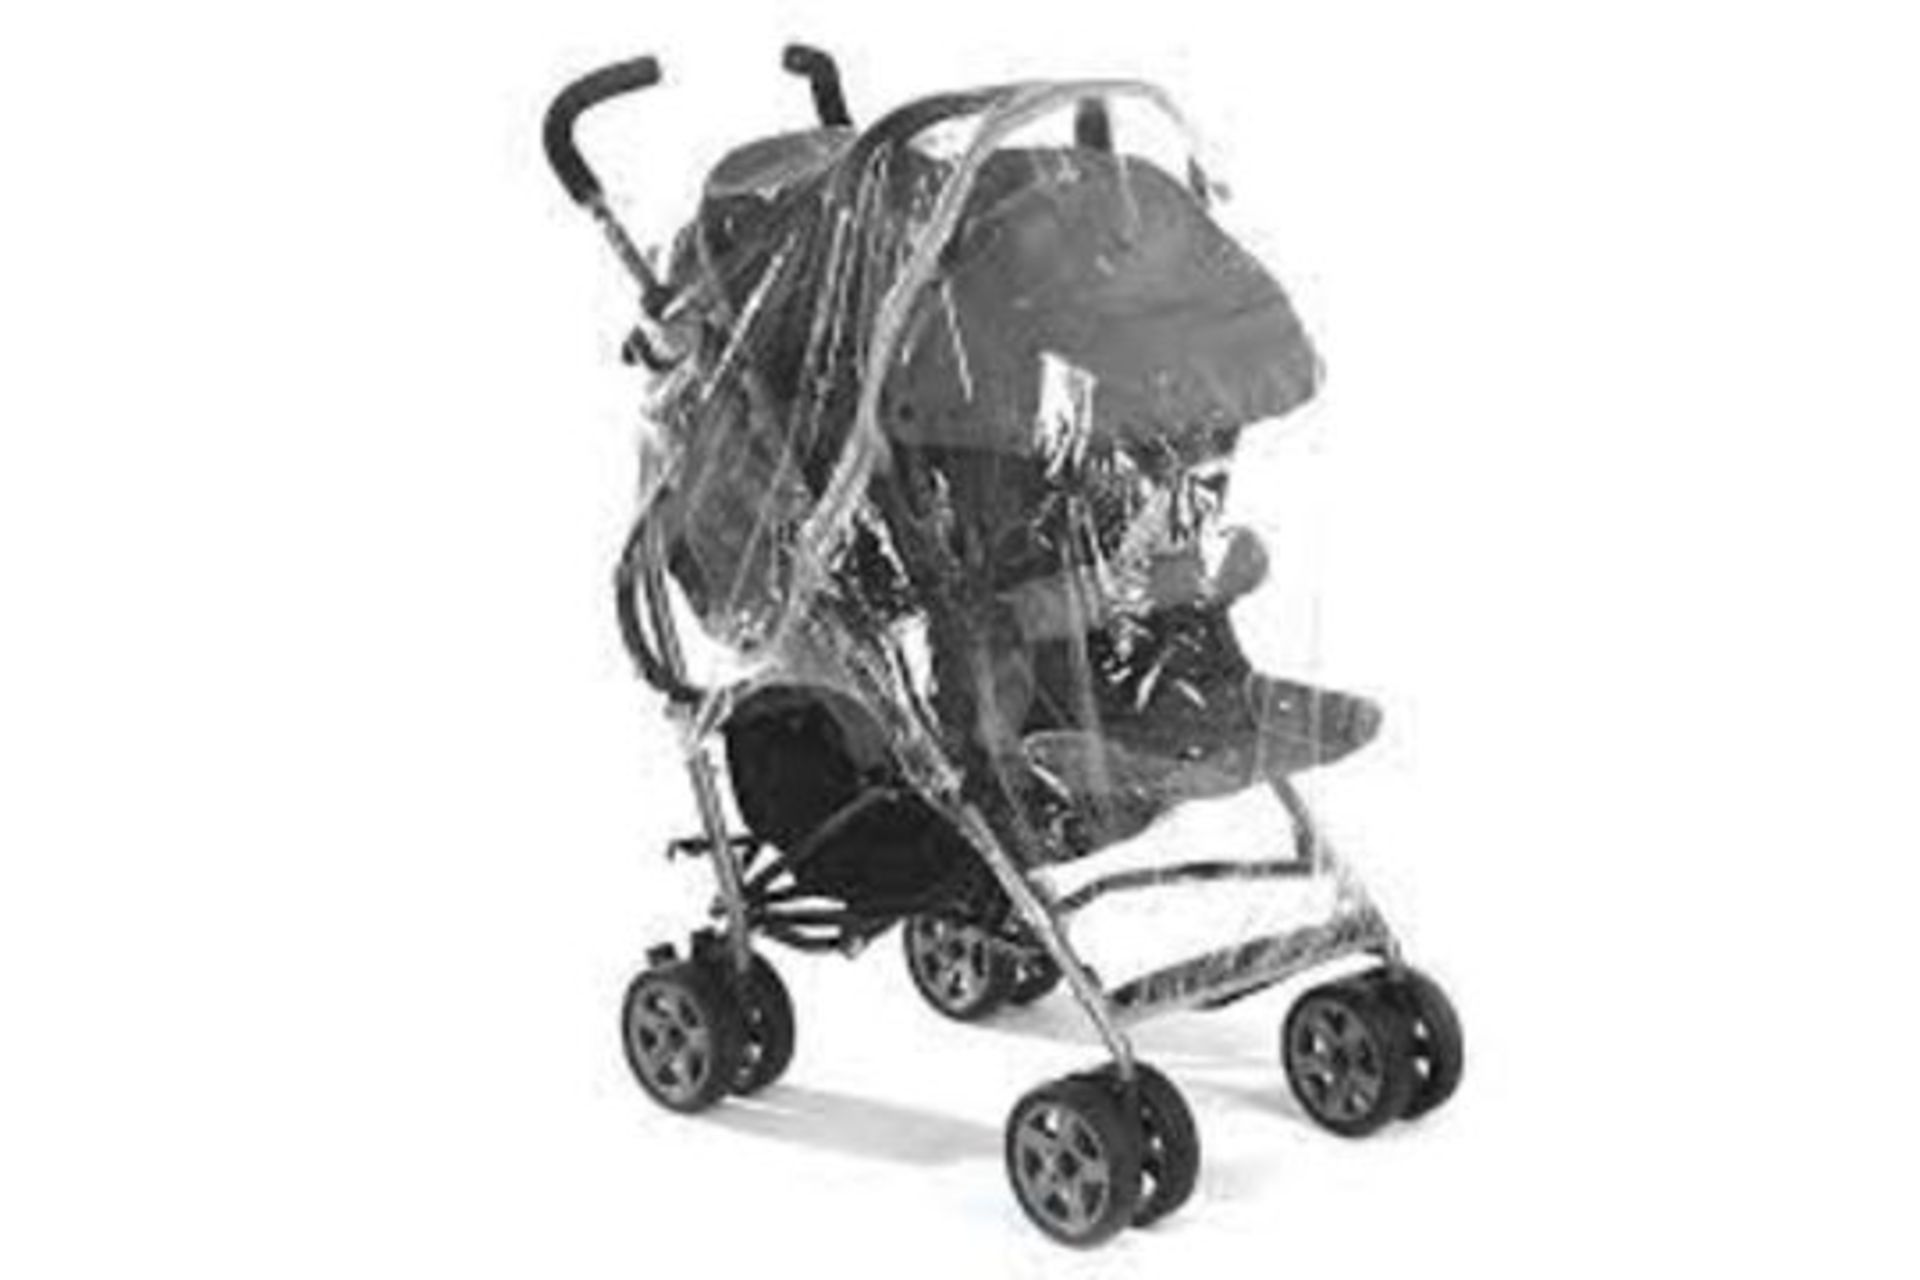 BRAND NEW GRACCO VOYAGER AIR 6 ALEXIS STROLLER RRP £179 R16-10